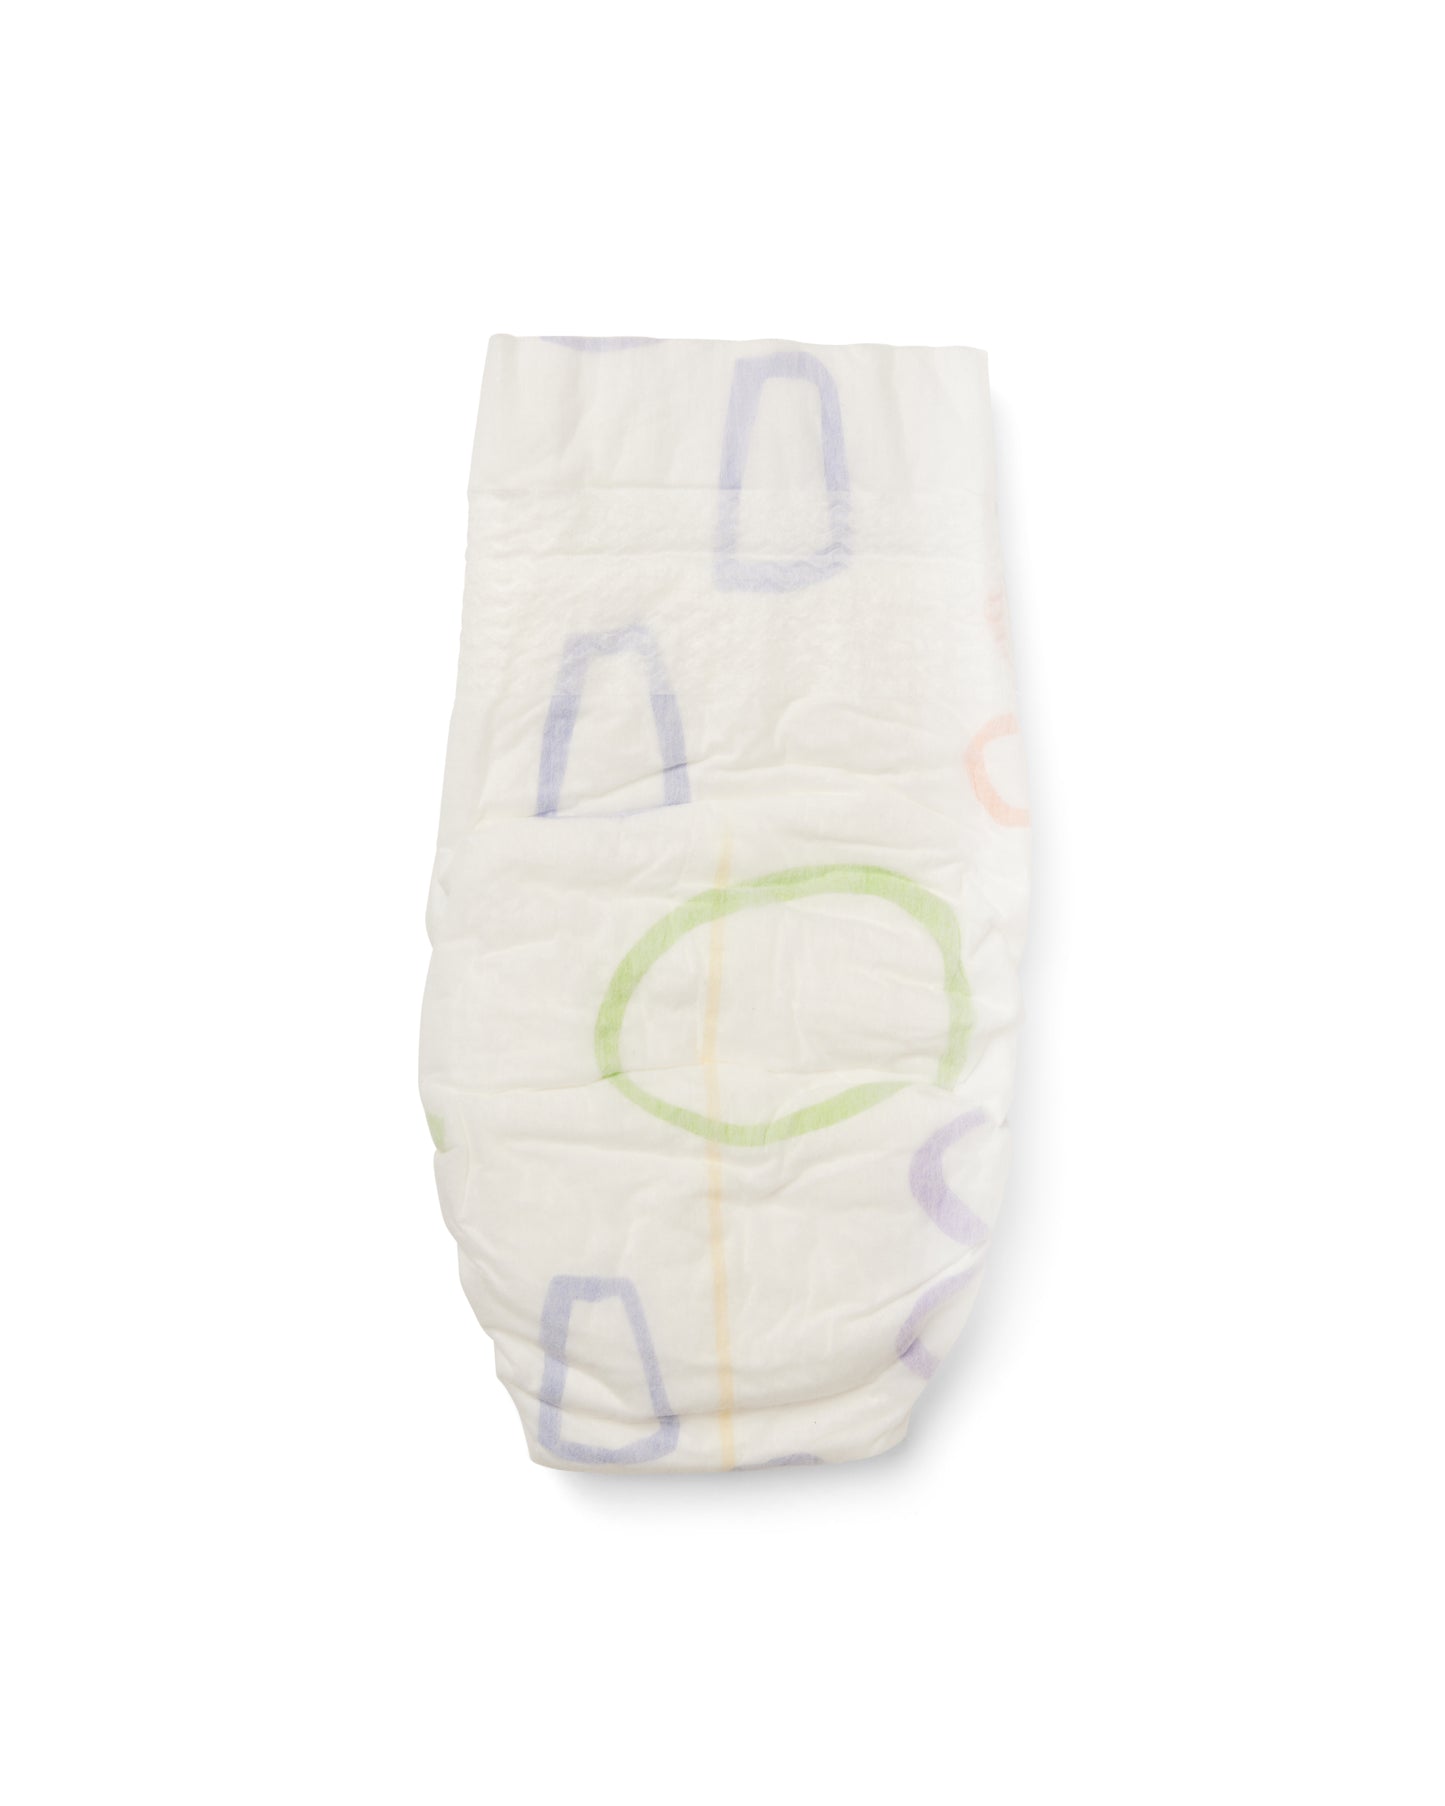 Sustainable Bamboo Diapers